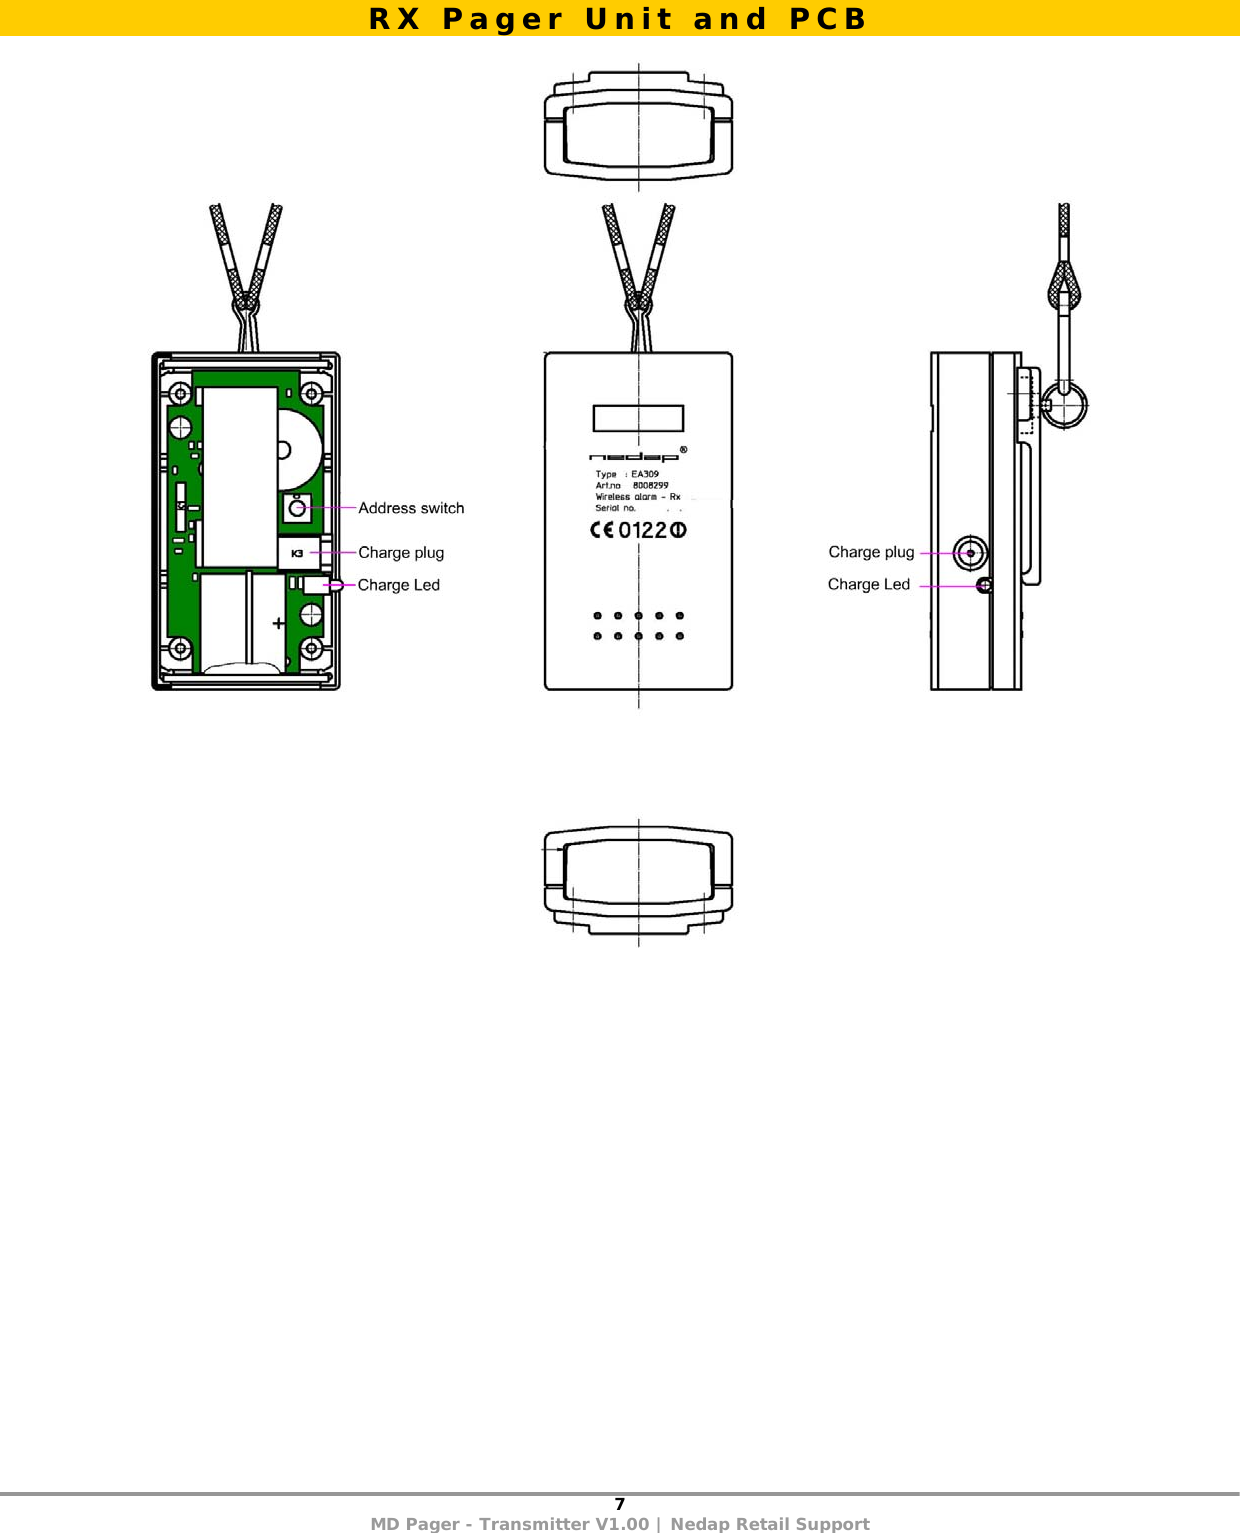 7 MD Pager - Transmitter V1.00 | Nedap Retail Support      RX Pager Unit and PCB 